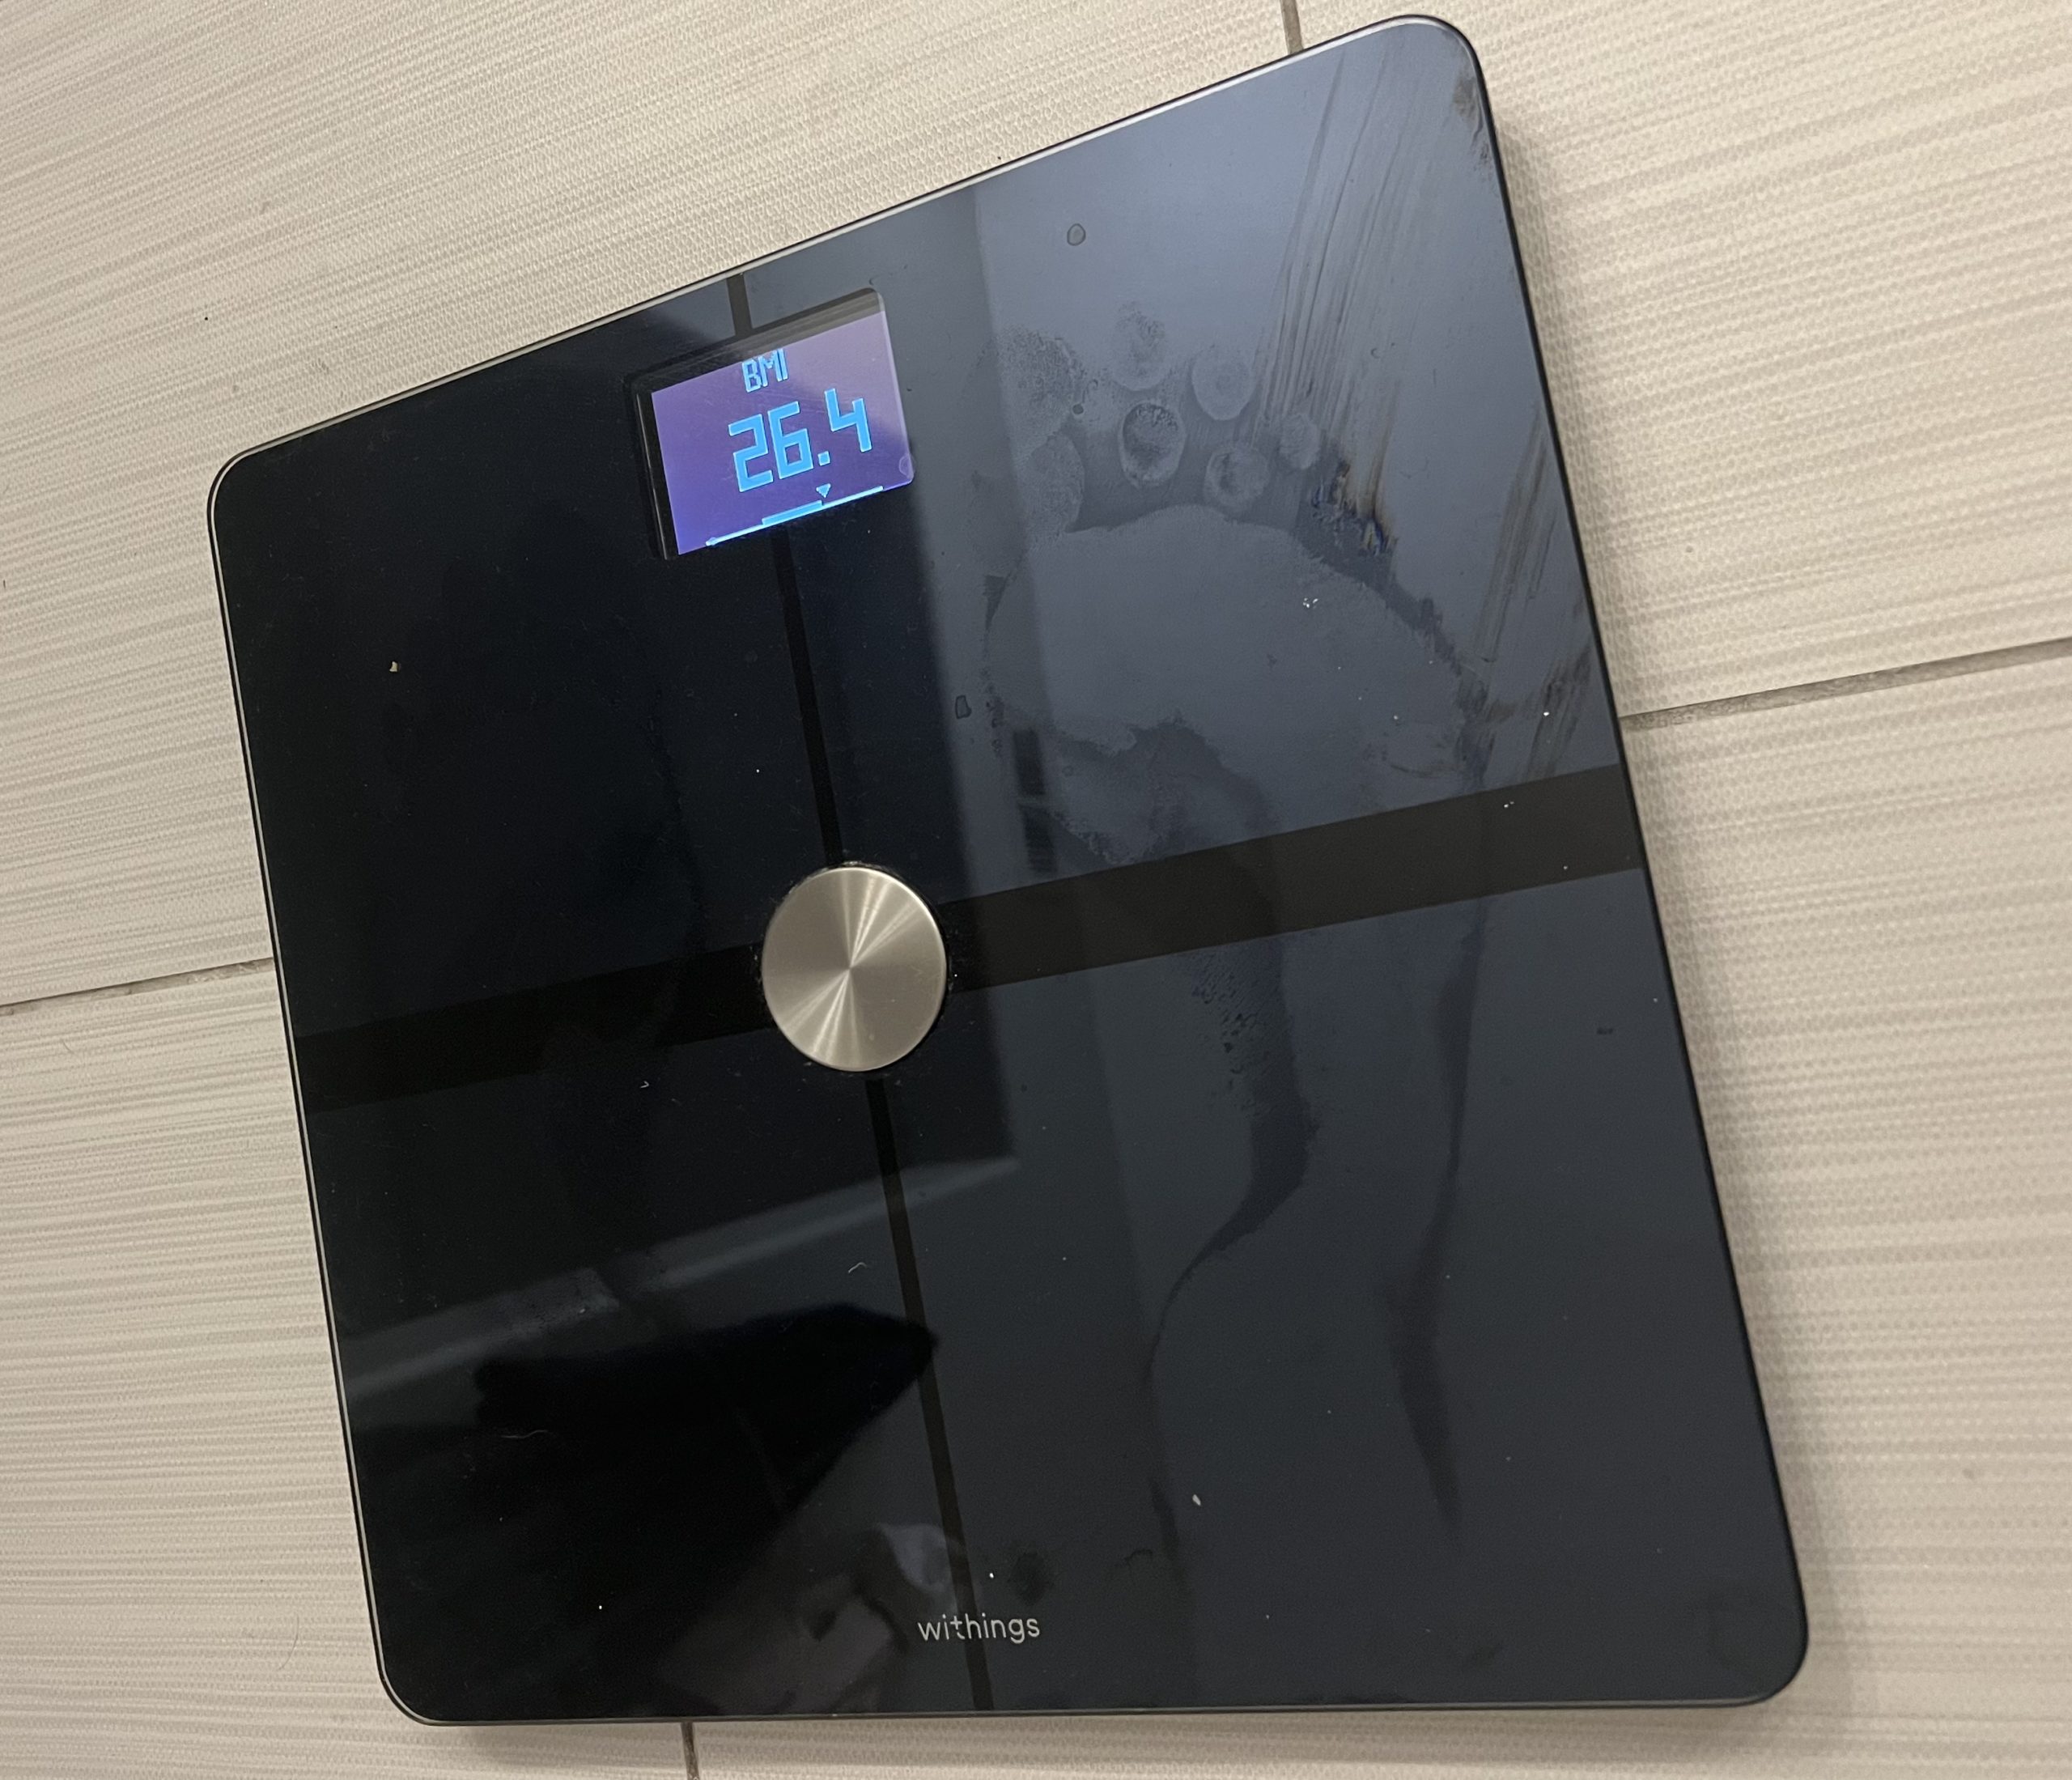 Withings body plus scale with bmi displayed